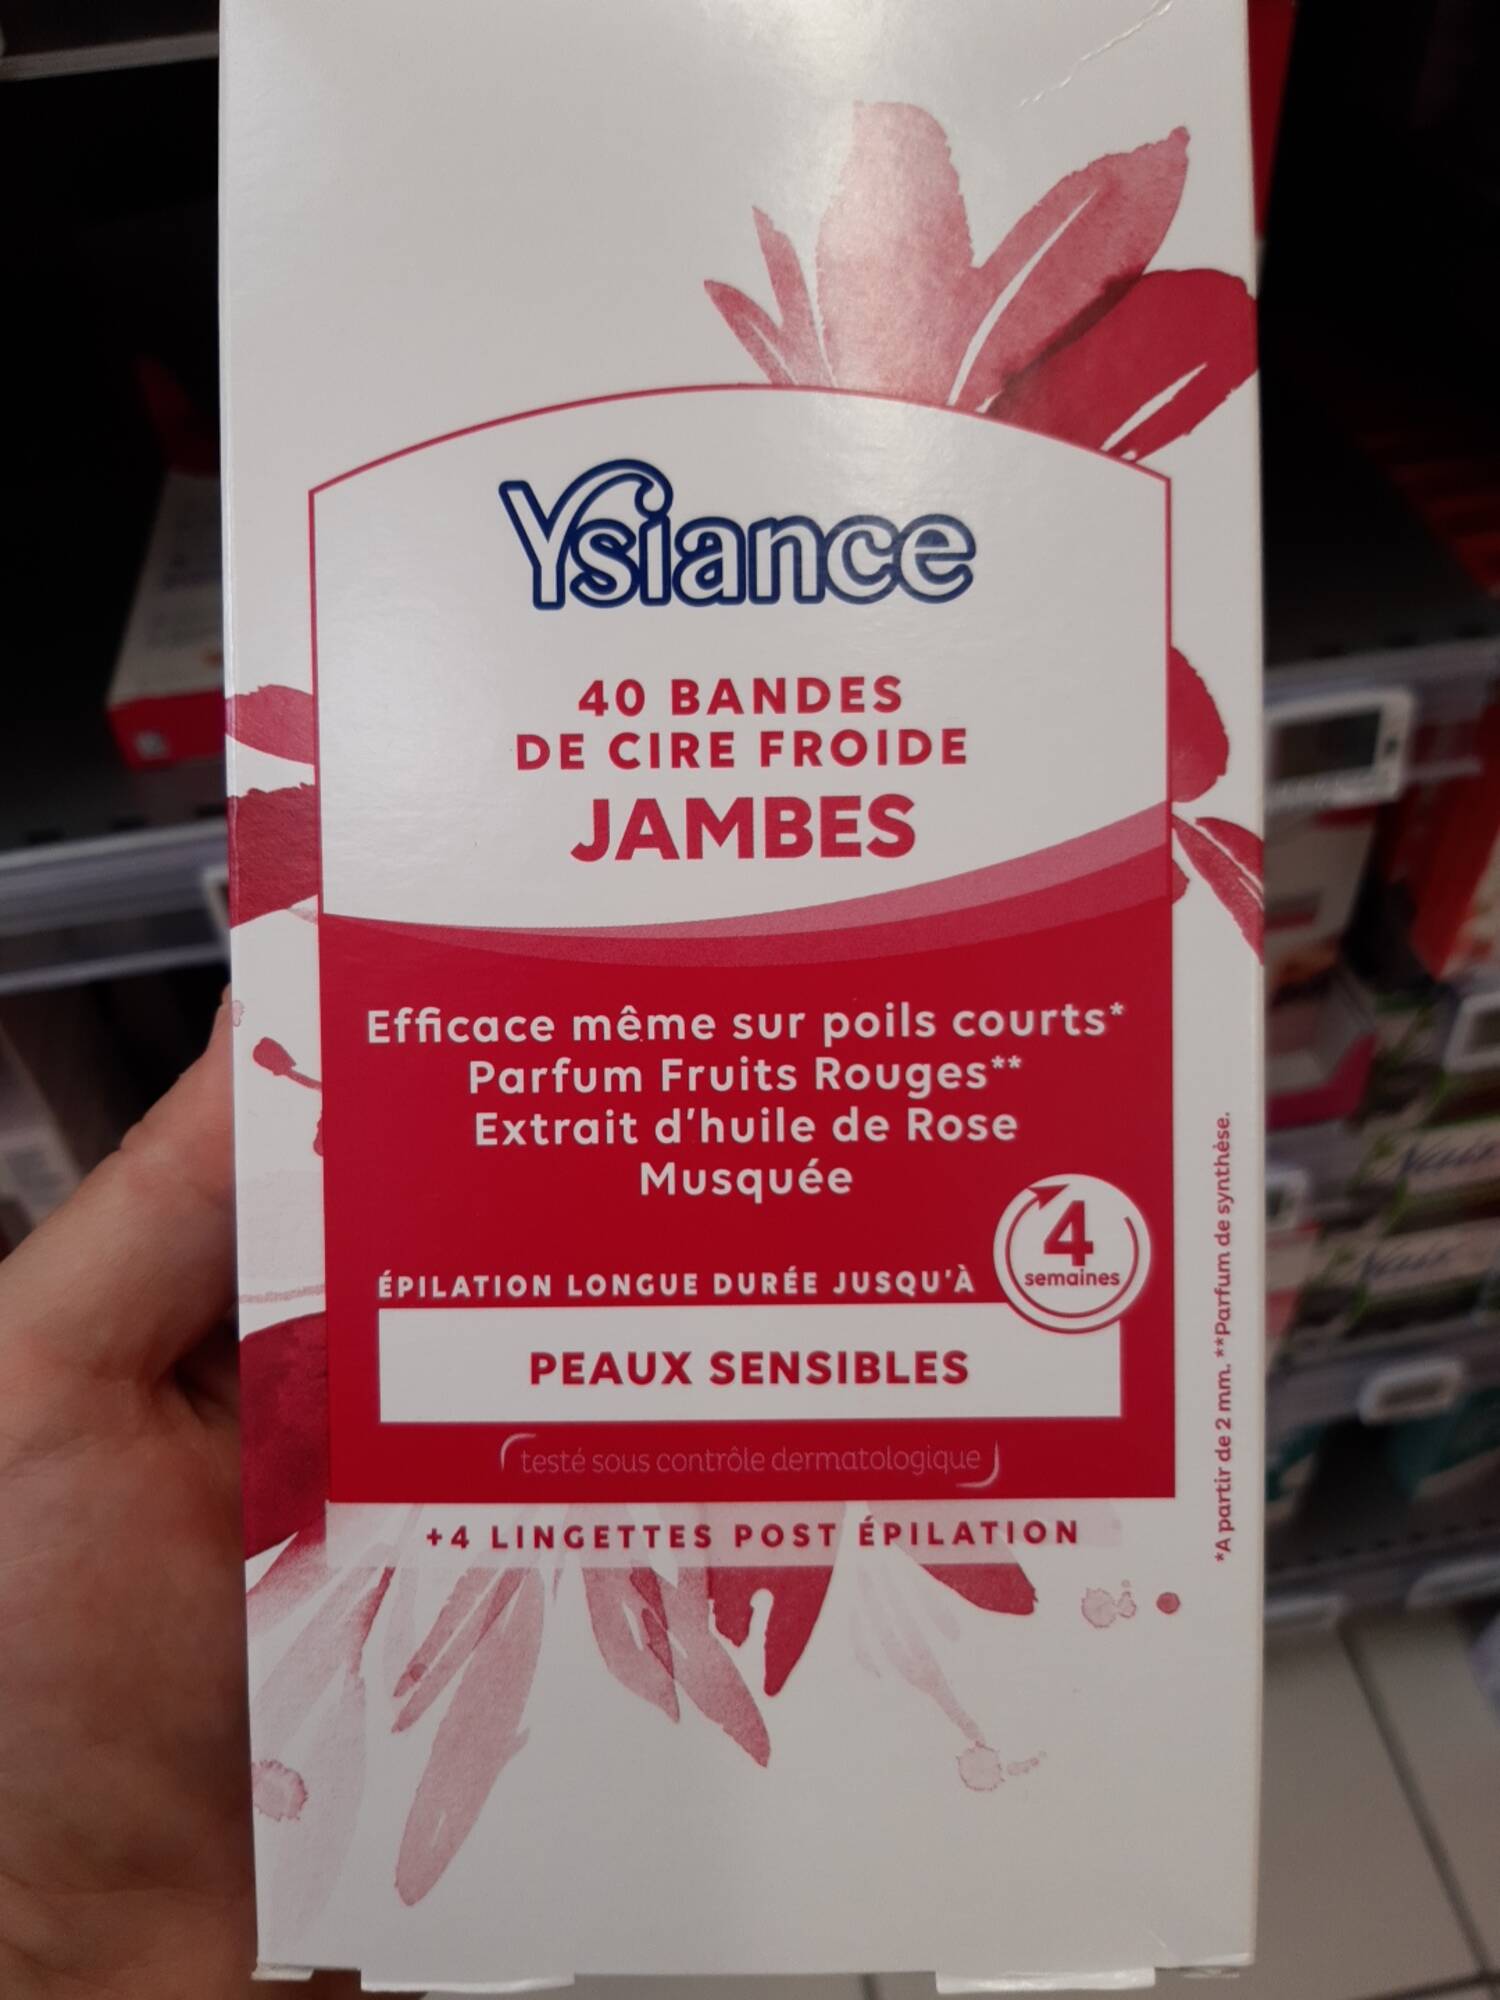 YSIANCE - Bandes de cire froide jambes